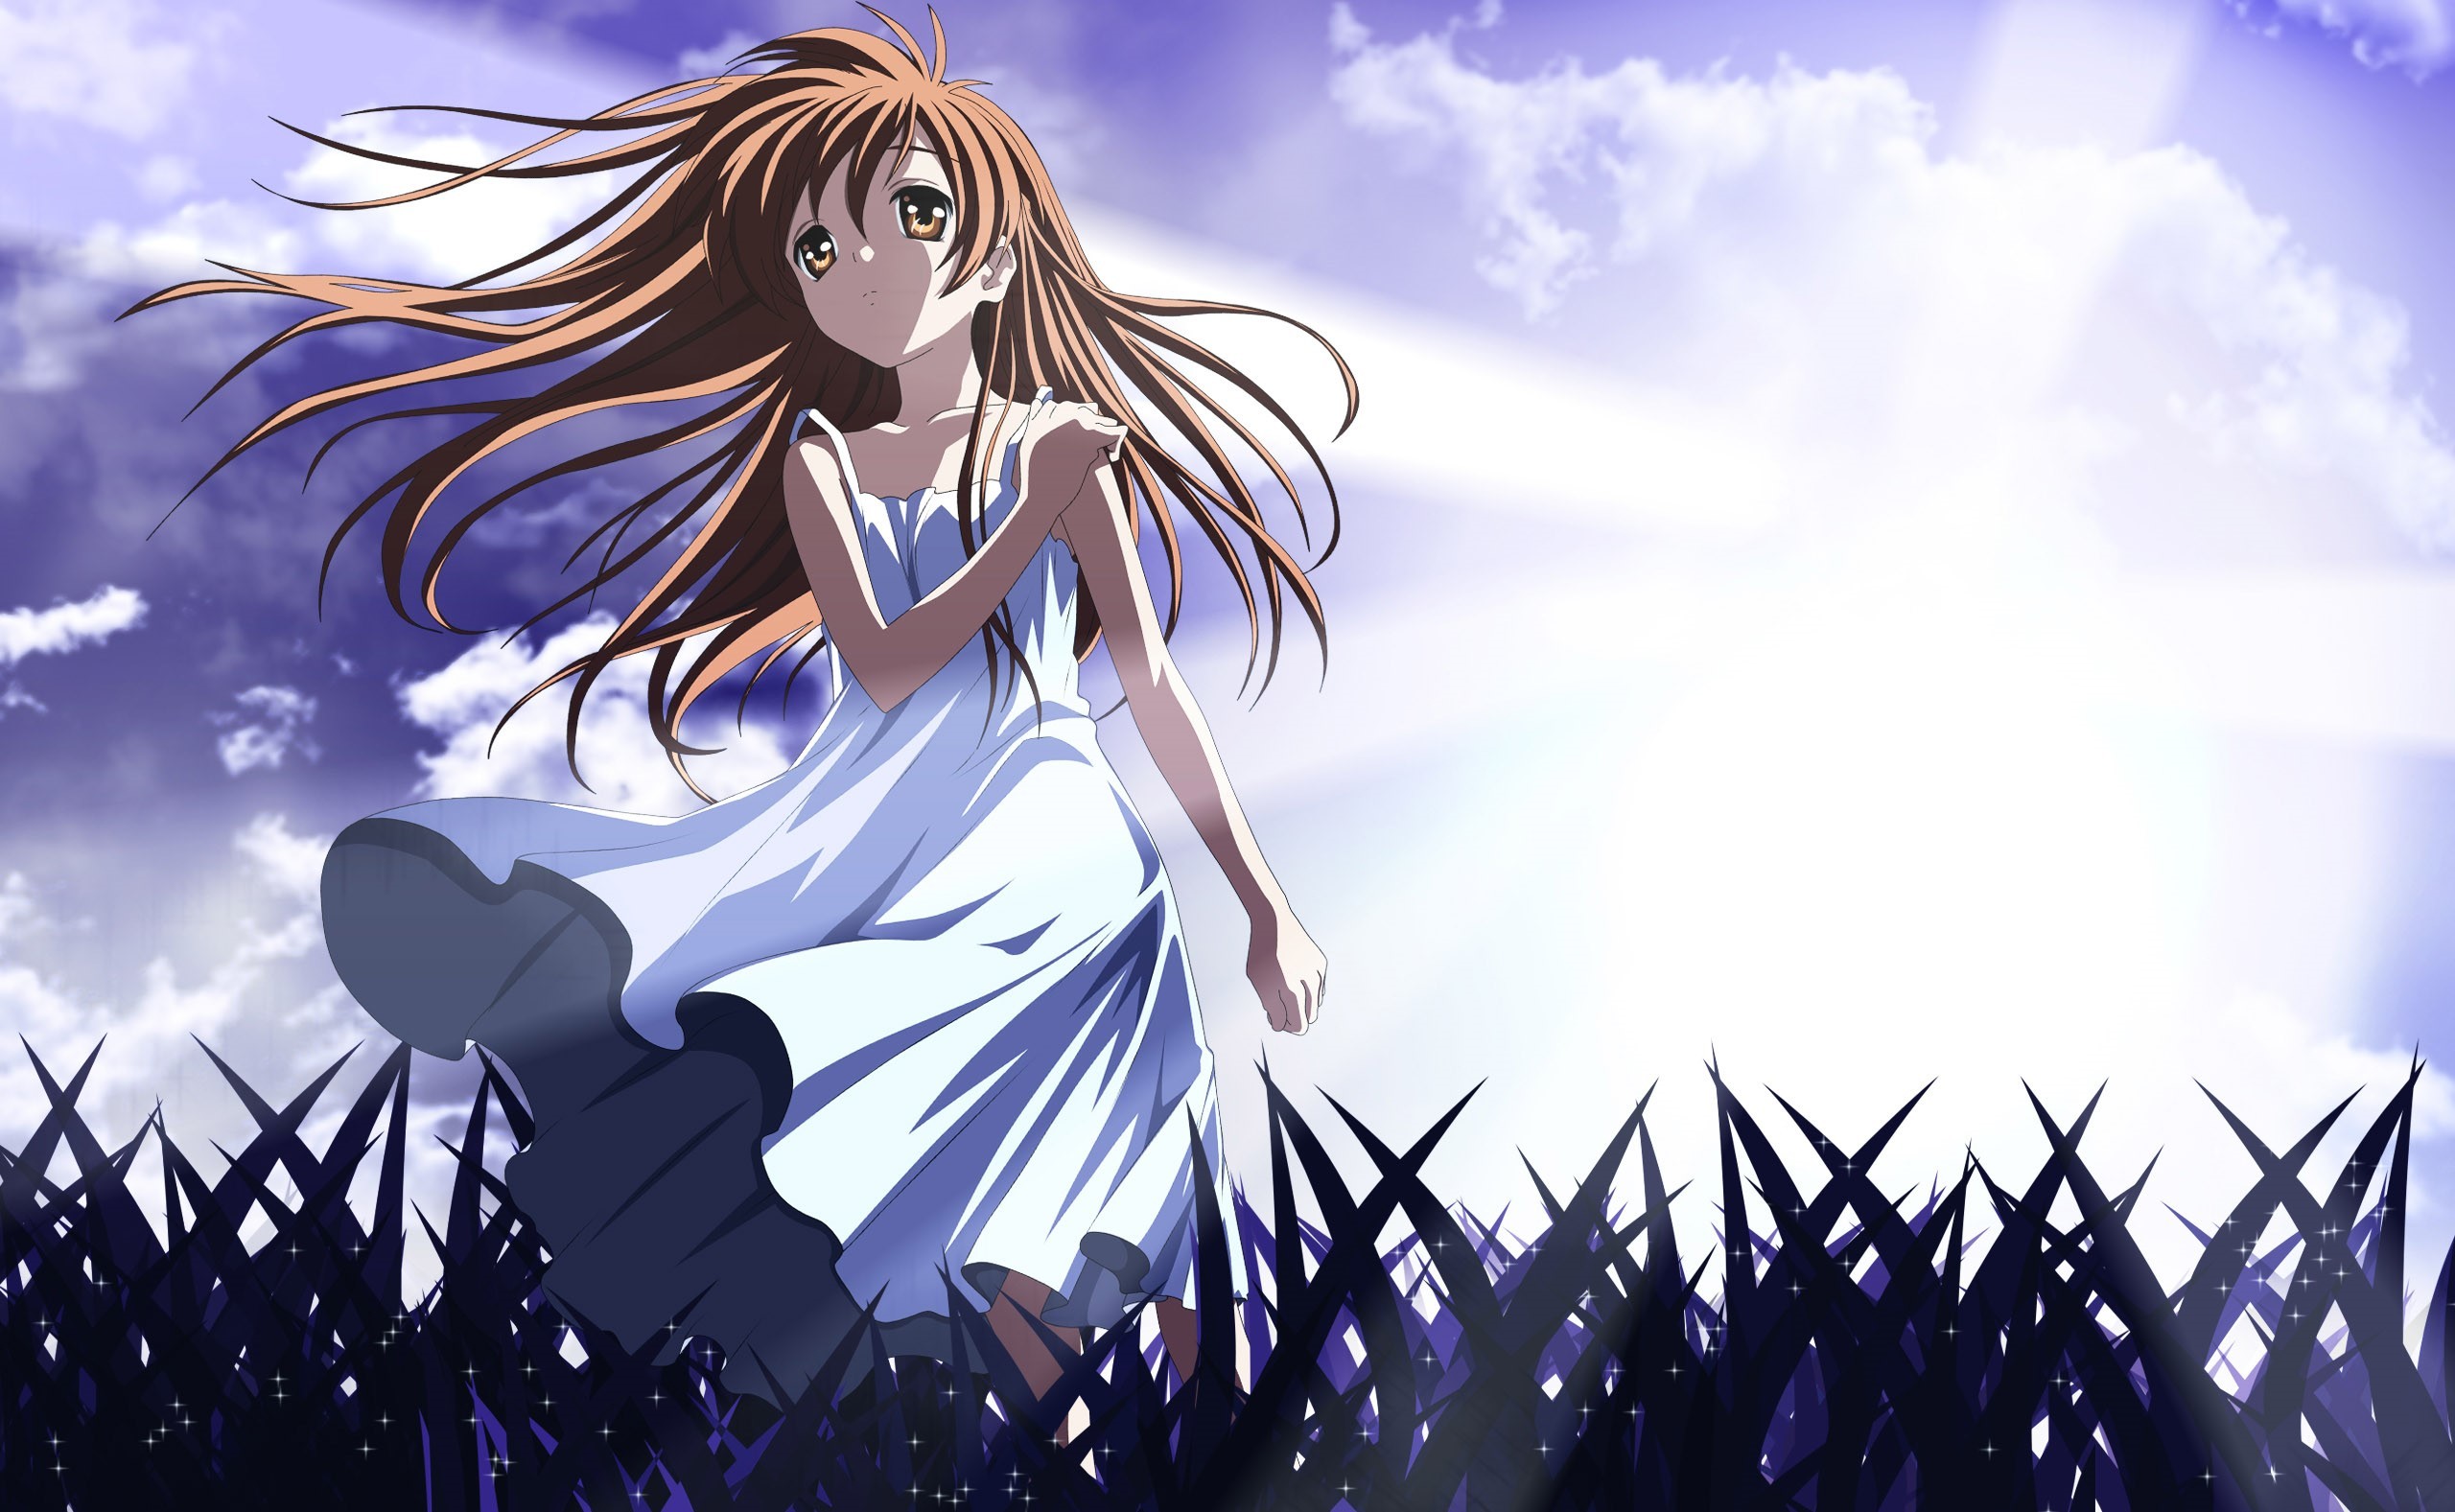 17 Clannad Wallpapers for iPhone and Android by Scott Roth